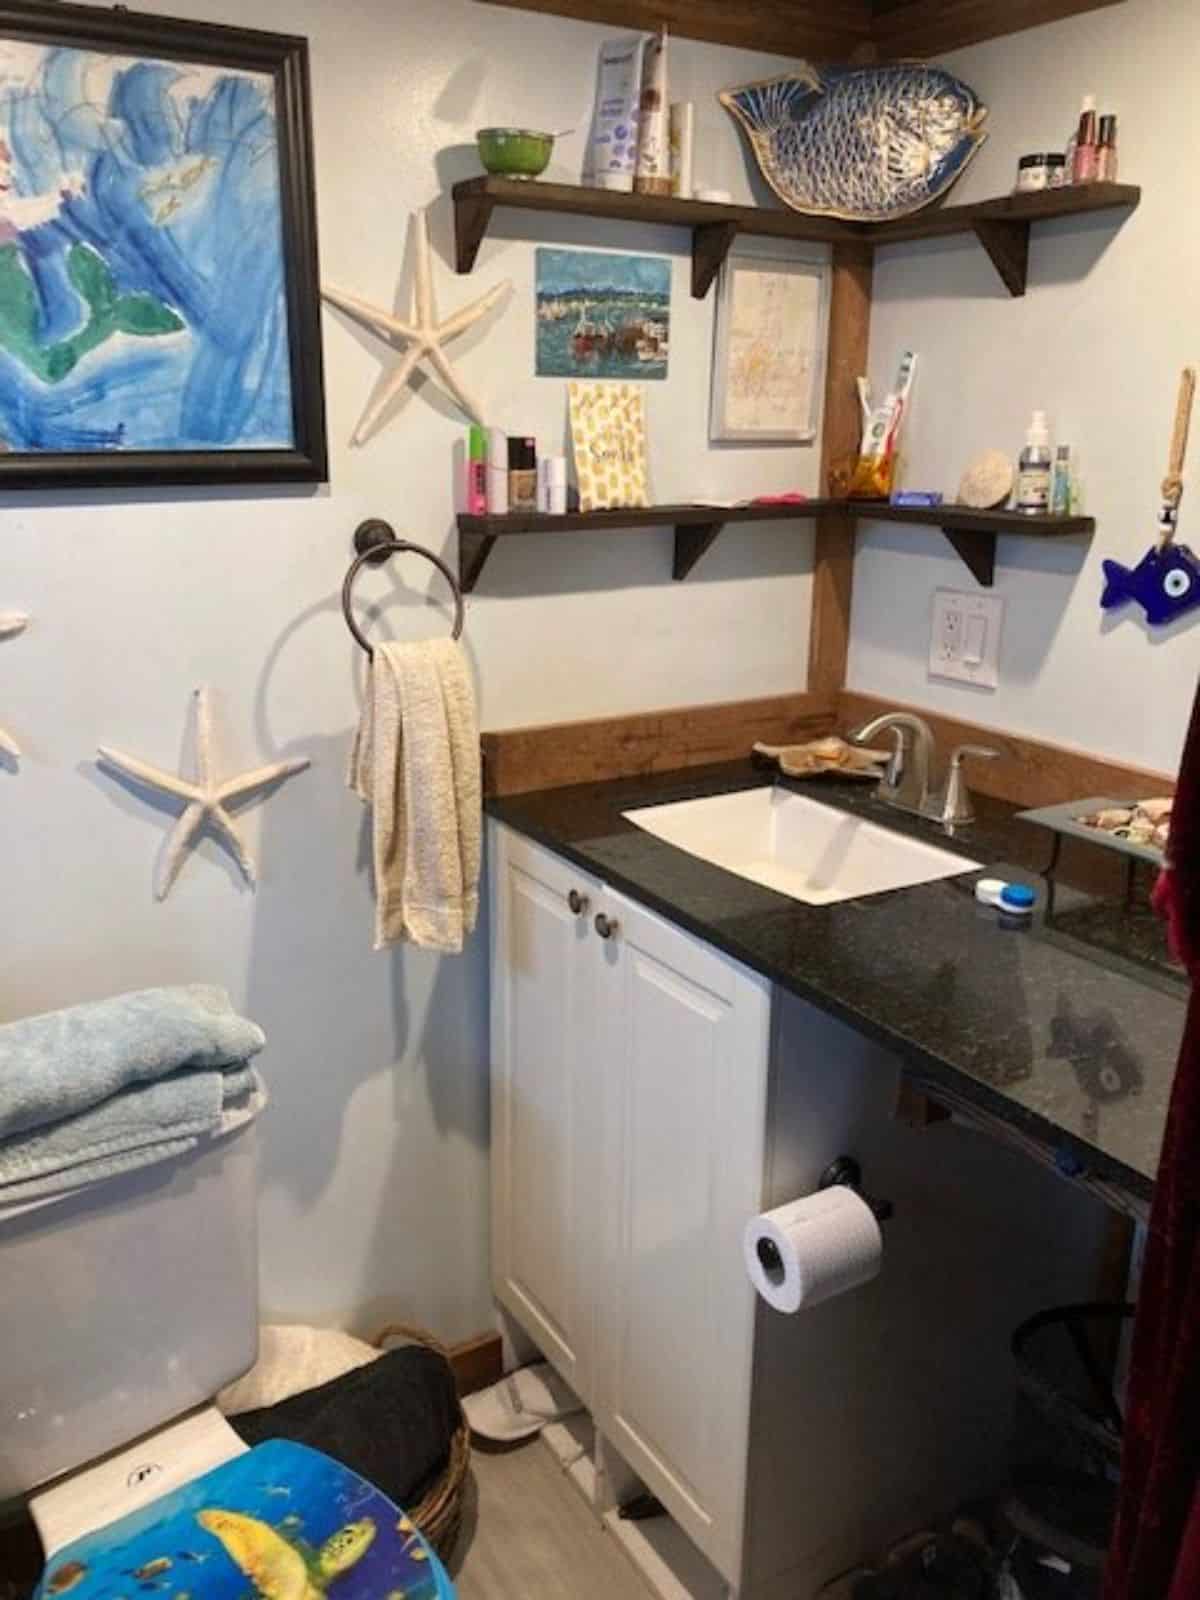 Bathroom has a sink with vanity and mirror